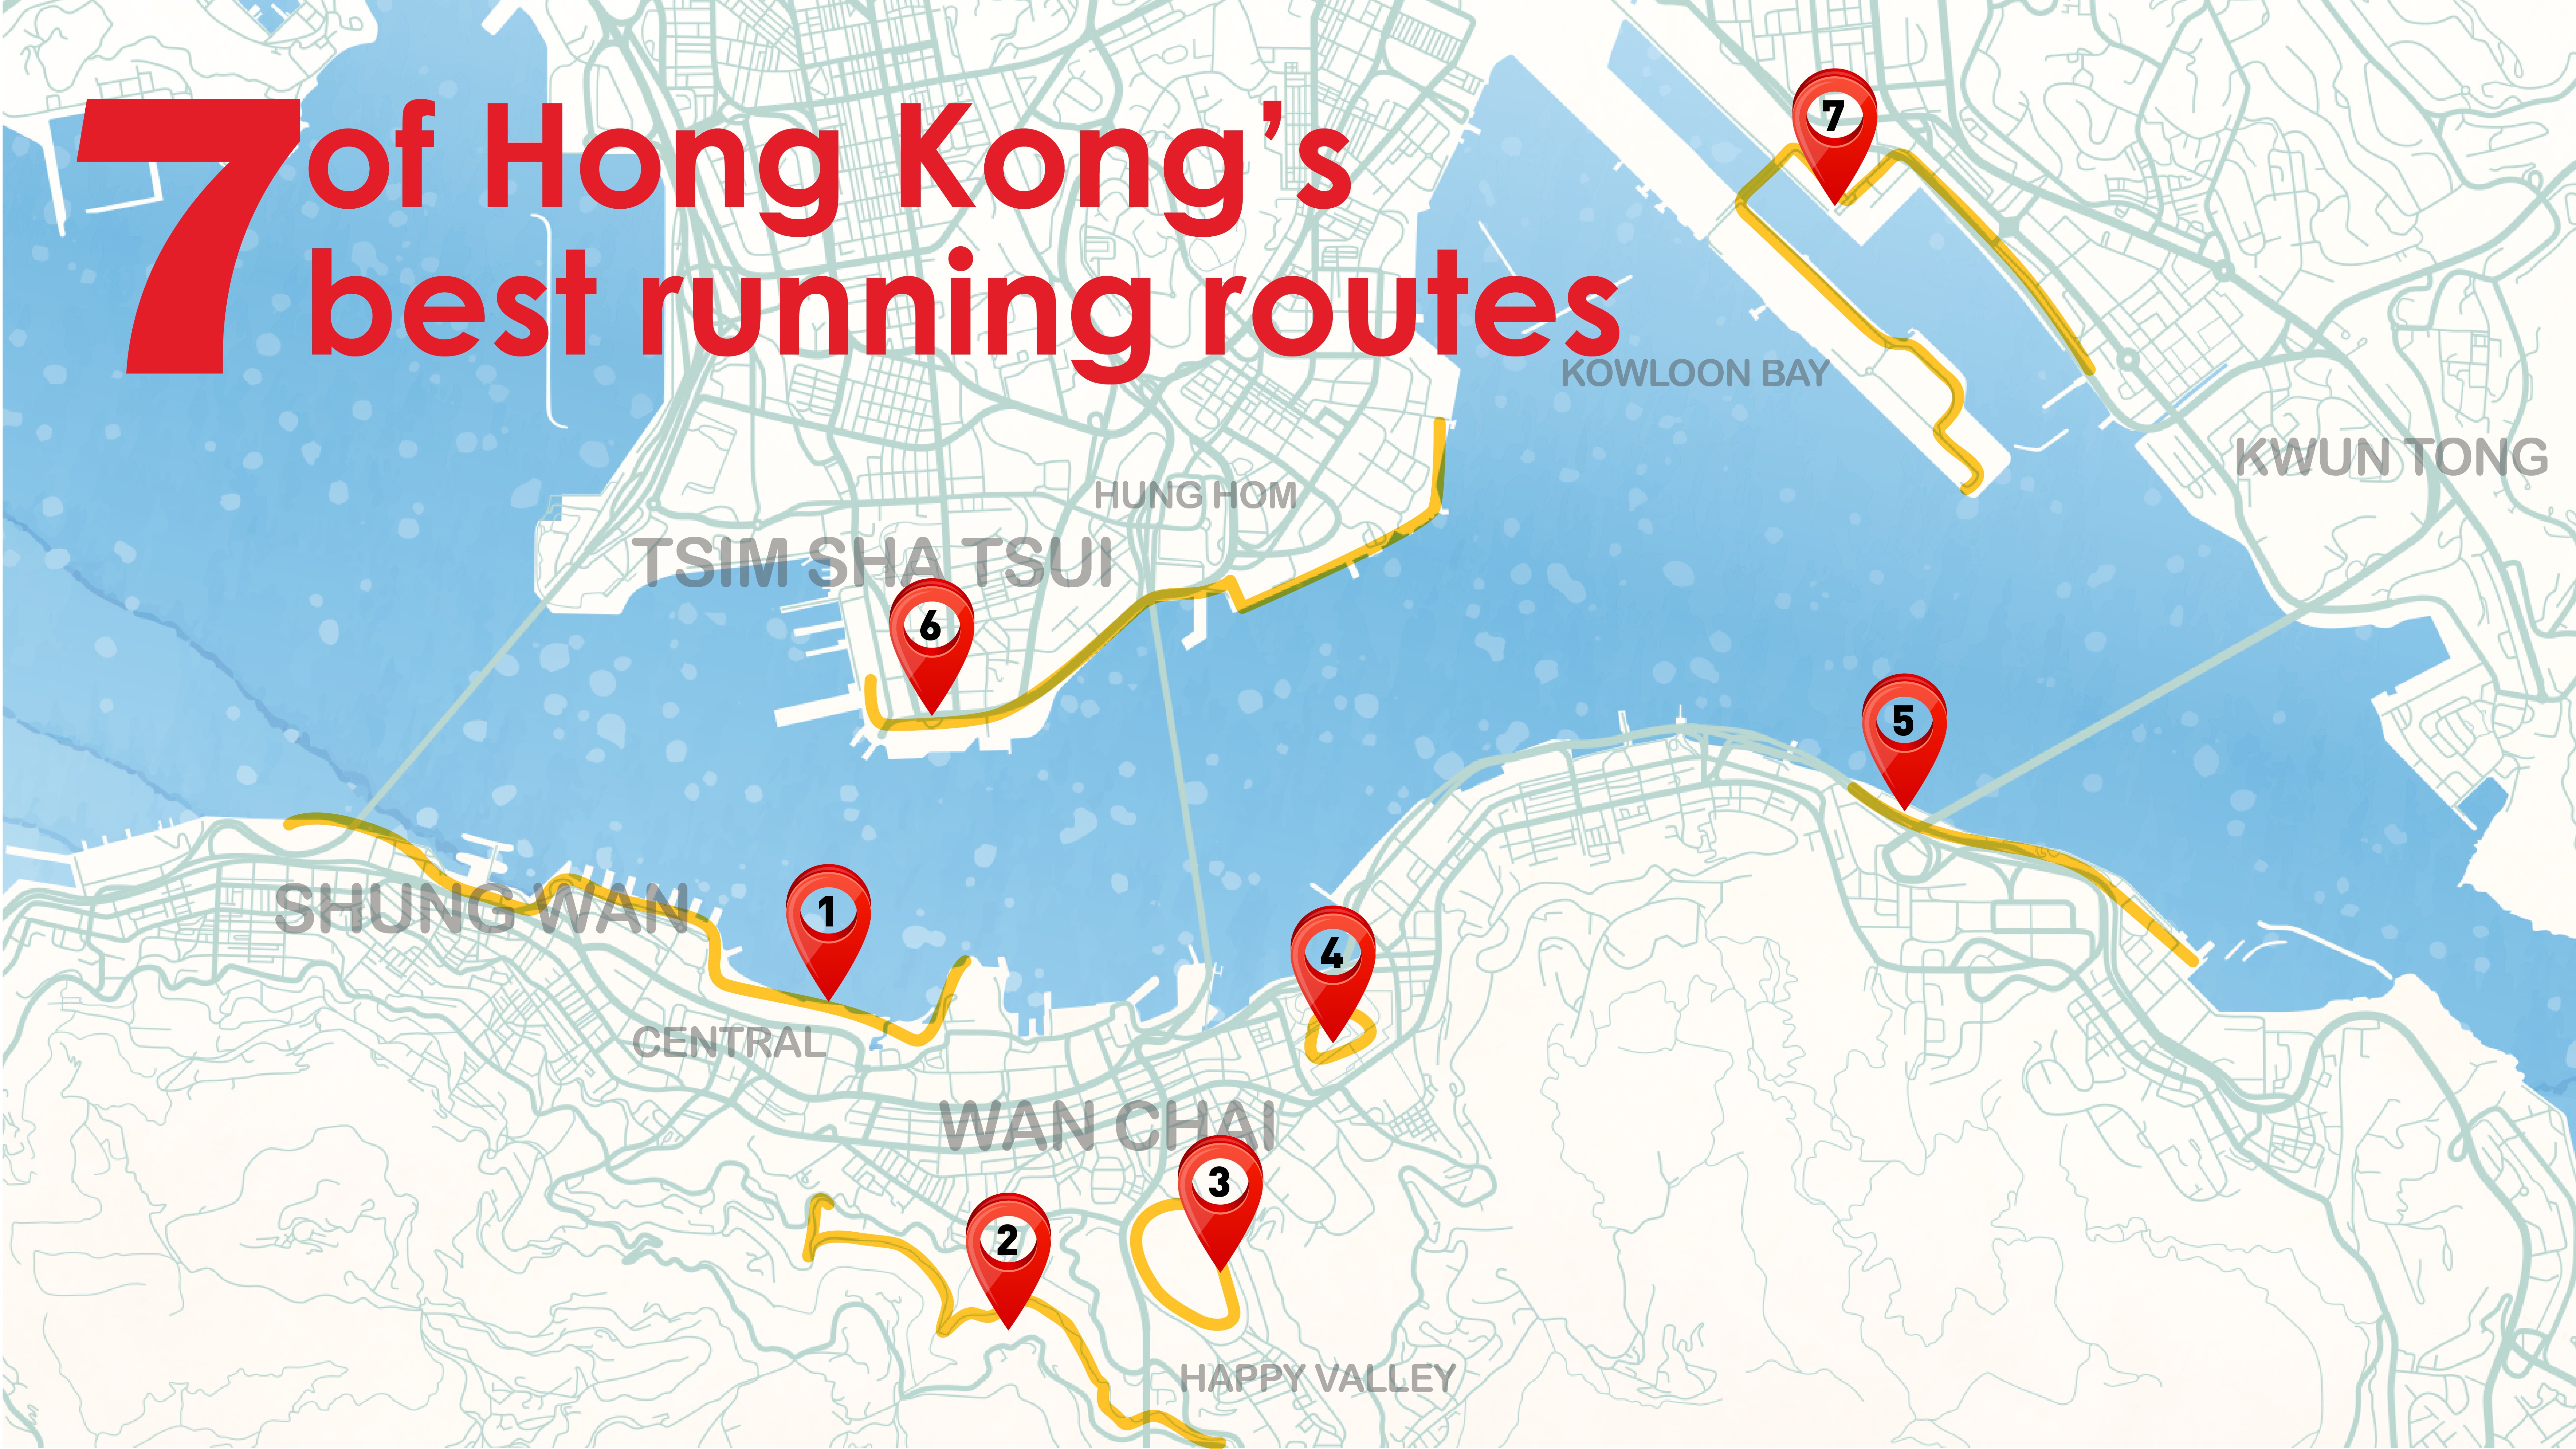 Hong Kong has many tranquil routes which allow runners to give their minds a break from the pressures of the city.